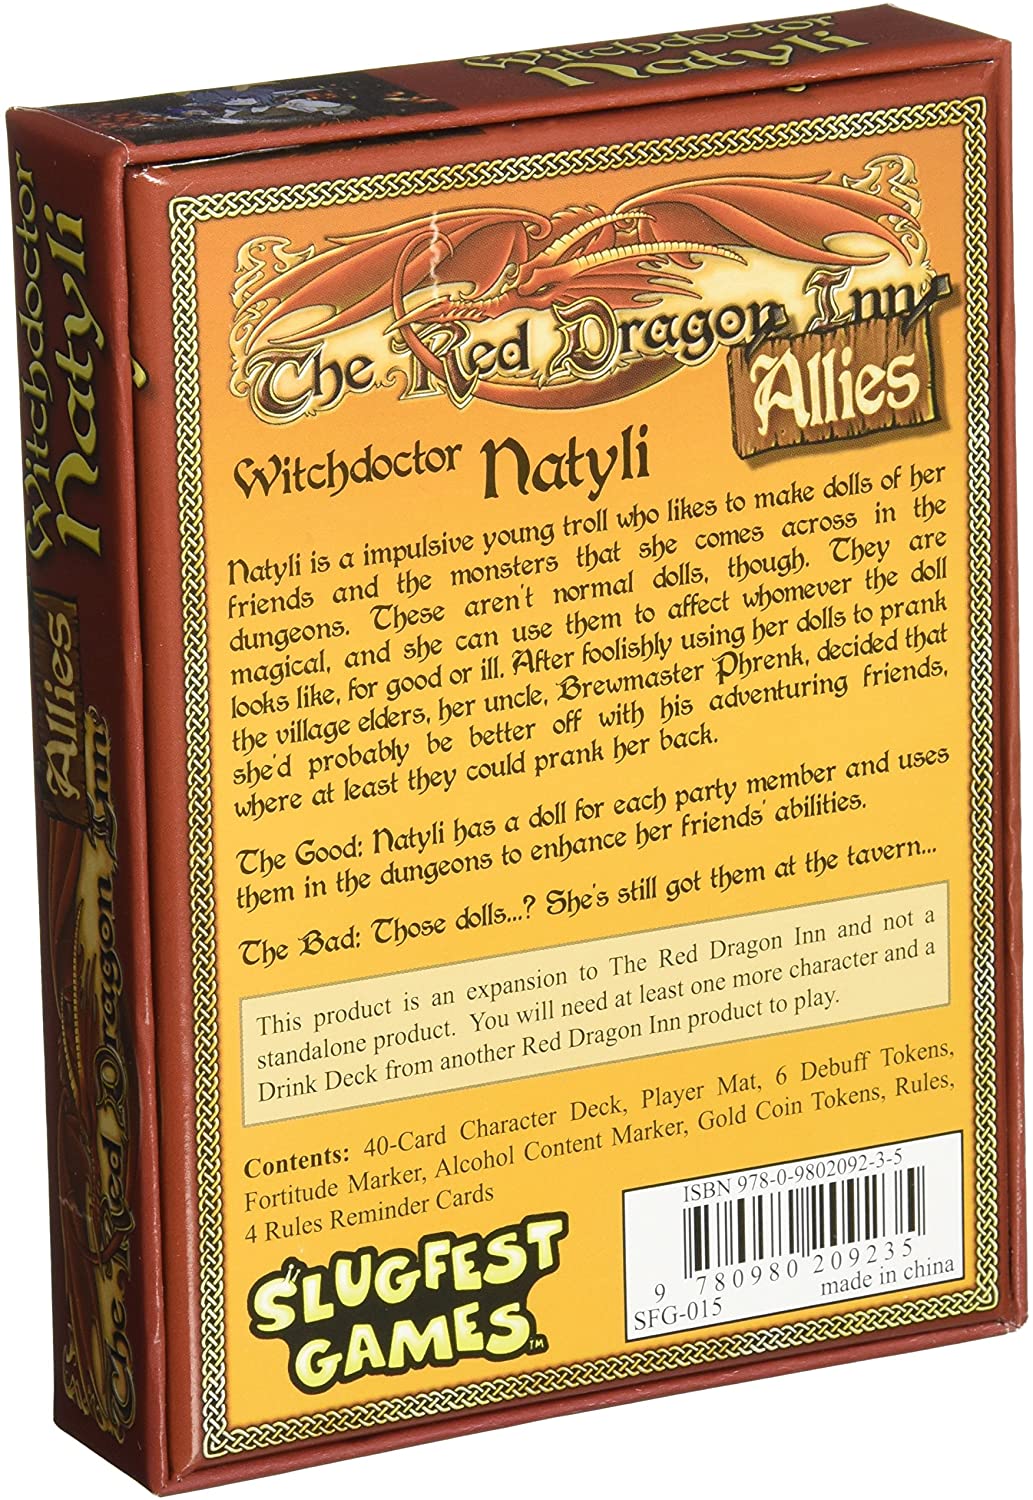 Red Dragon Inn Allies: Witchdoctor Natyli Exp.